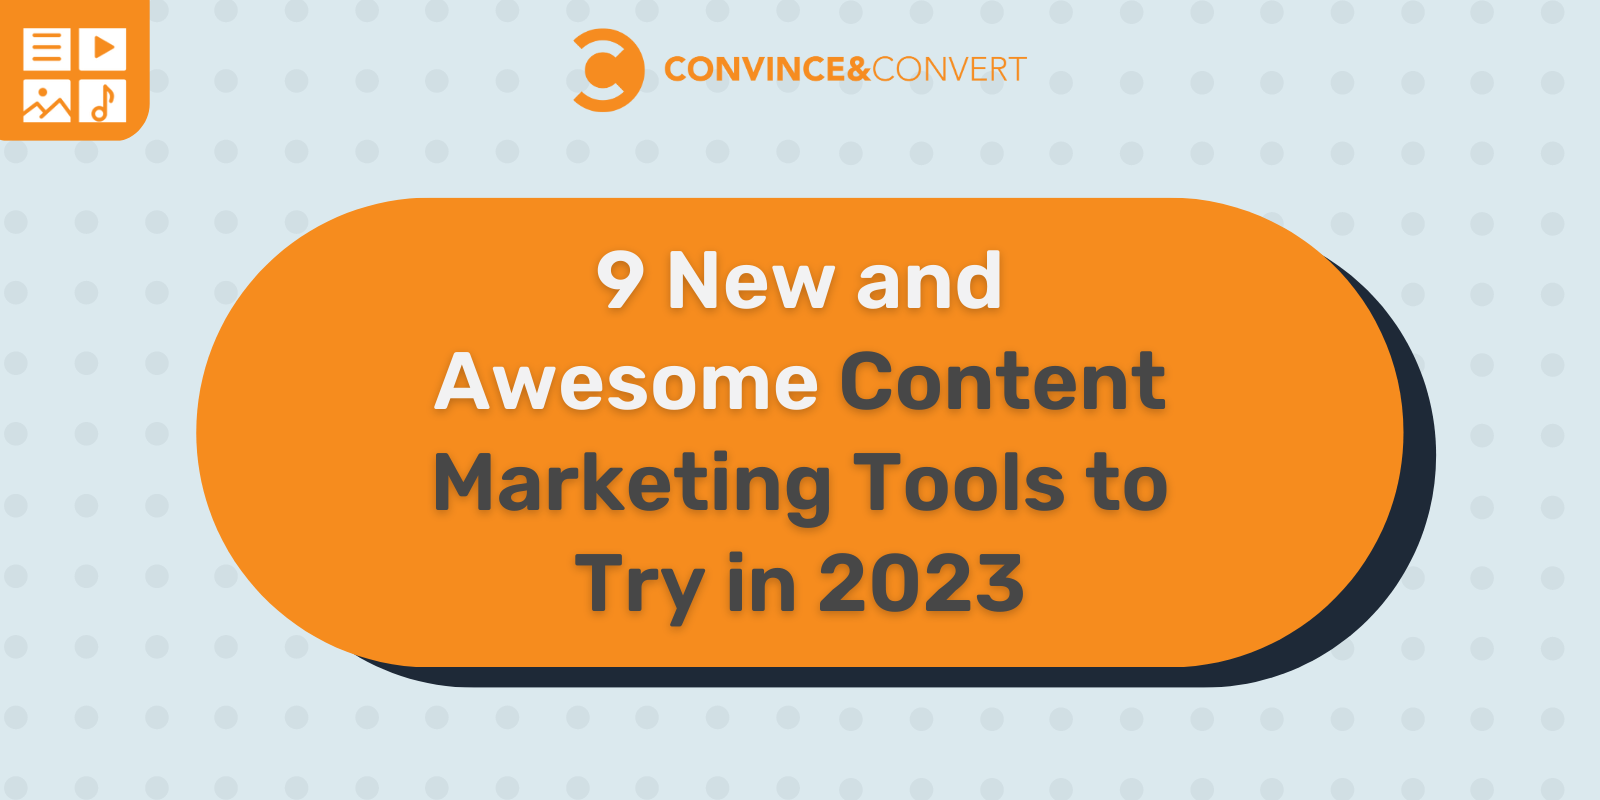 9 New and Awesome Content Marketing Tools to Try in 2023